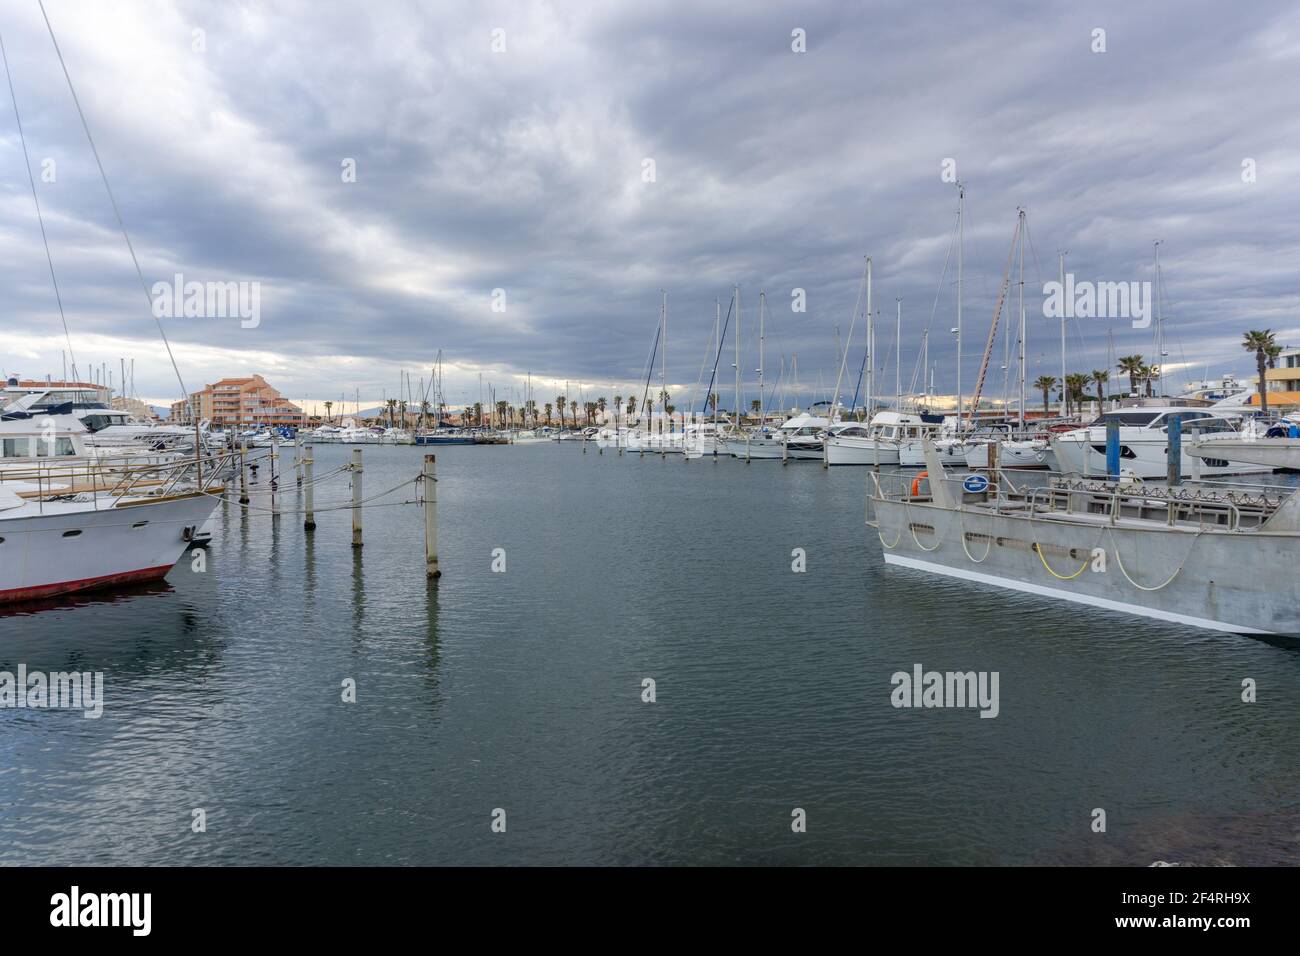 Le Barcares, France - 13 March, 2021: many boats and ships in the harbor of Port Barcares in southern France Stock Photo